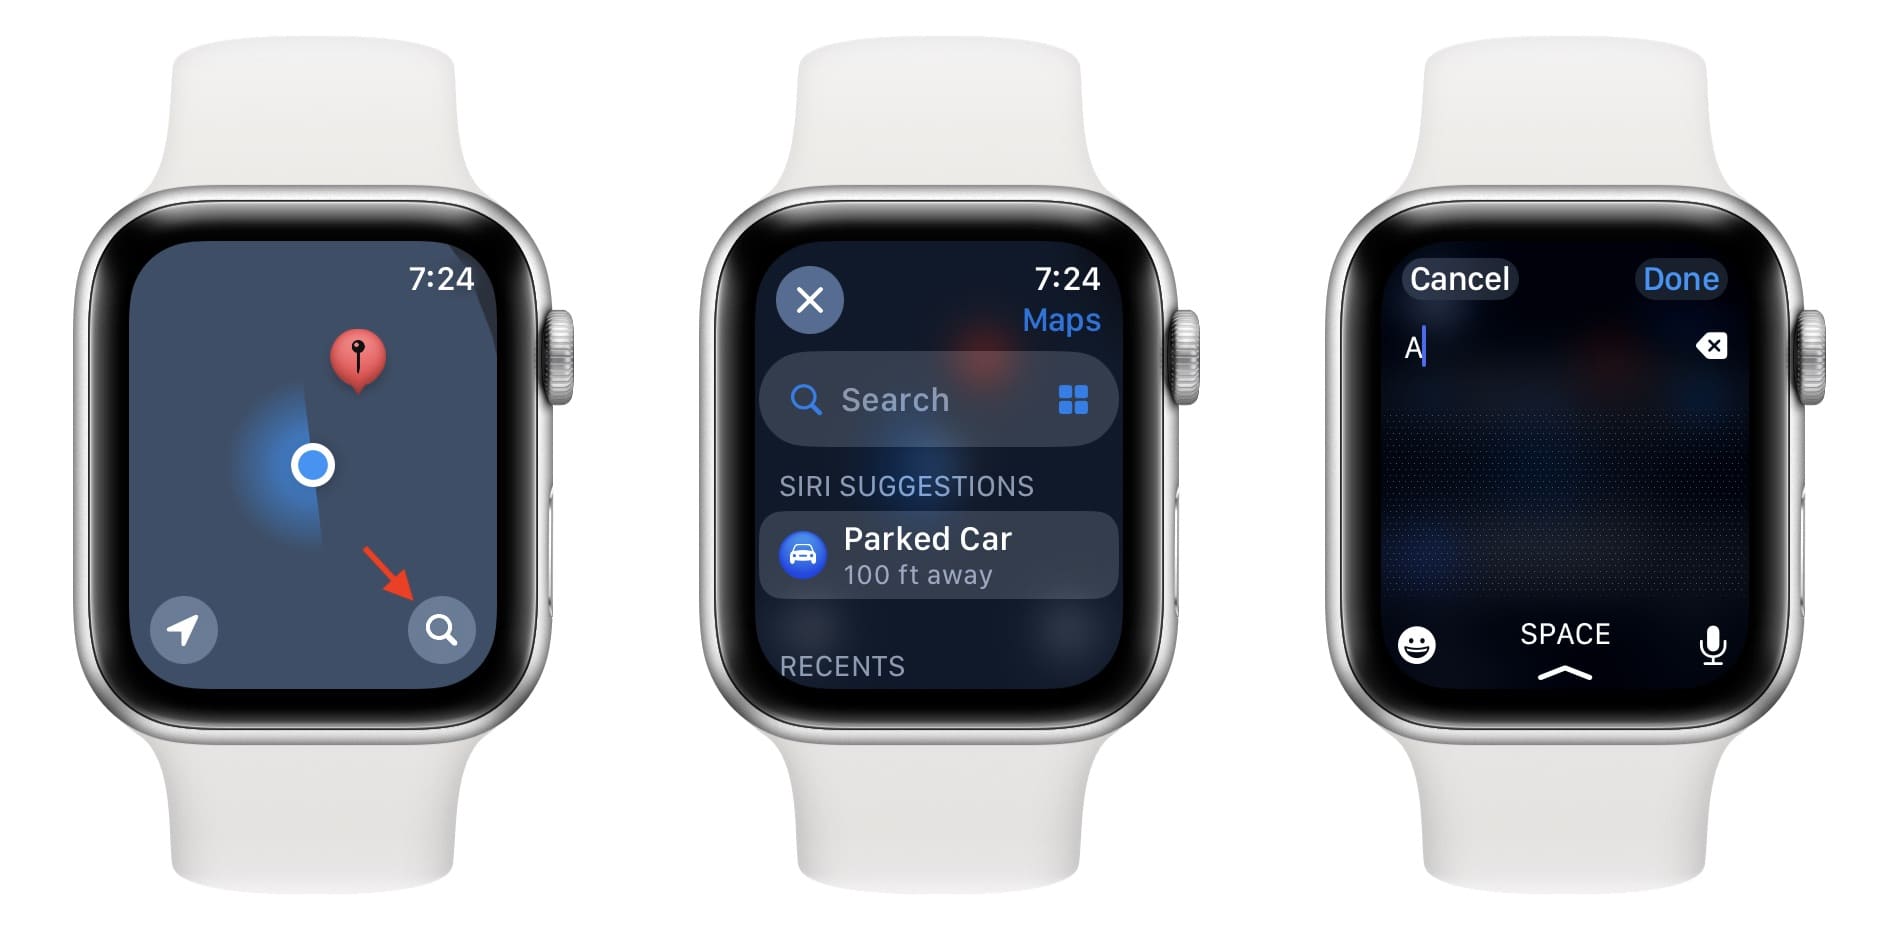 Search your favorite way in Maps on Apple Watch